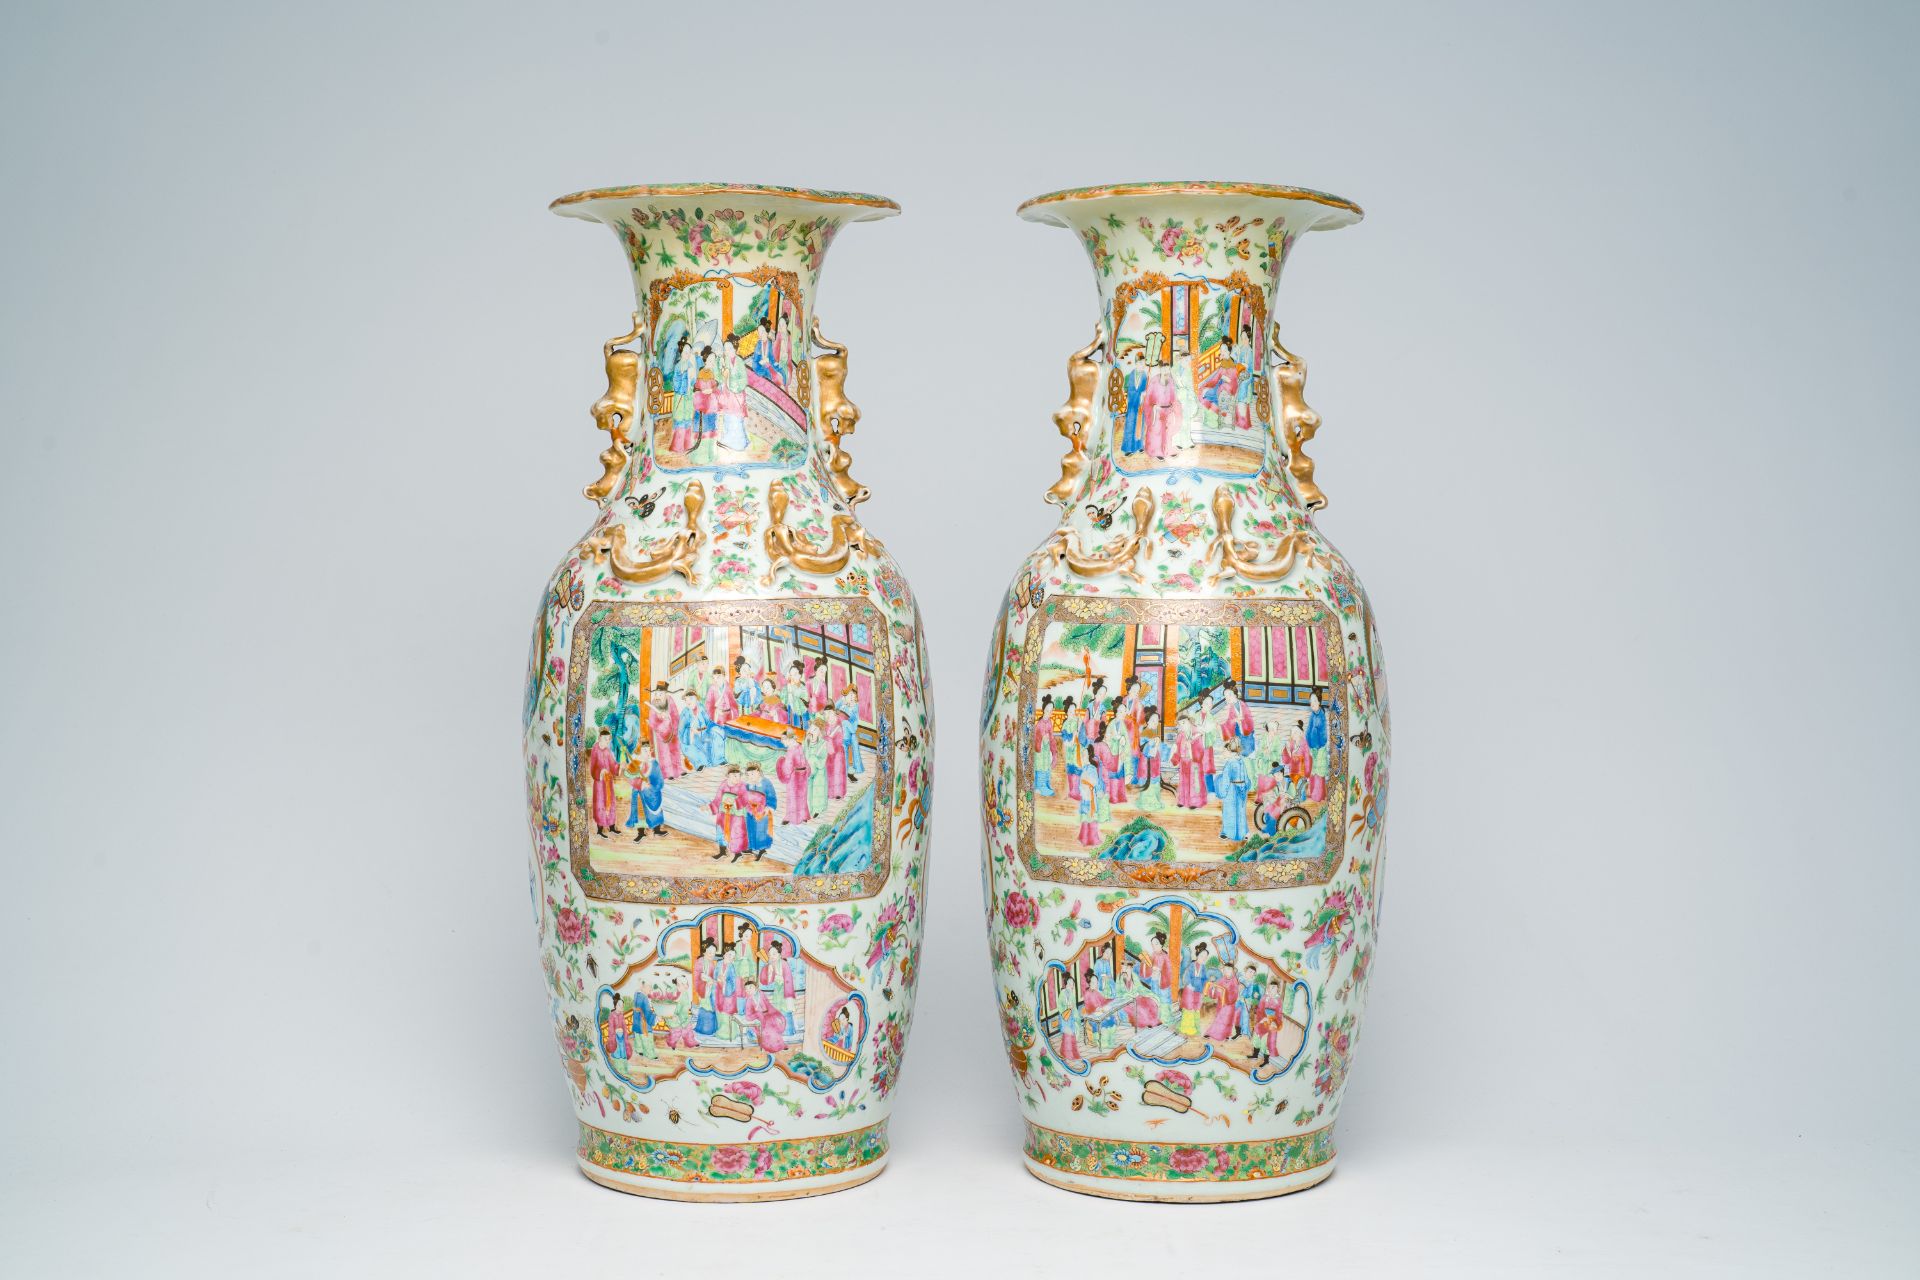 A pair of Chinese Canton famille rose vases with palace scenes and floral design, 19th C.